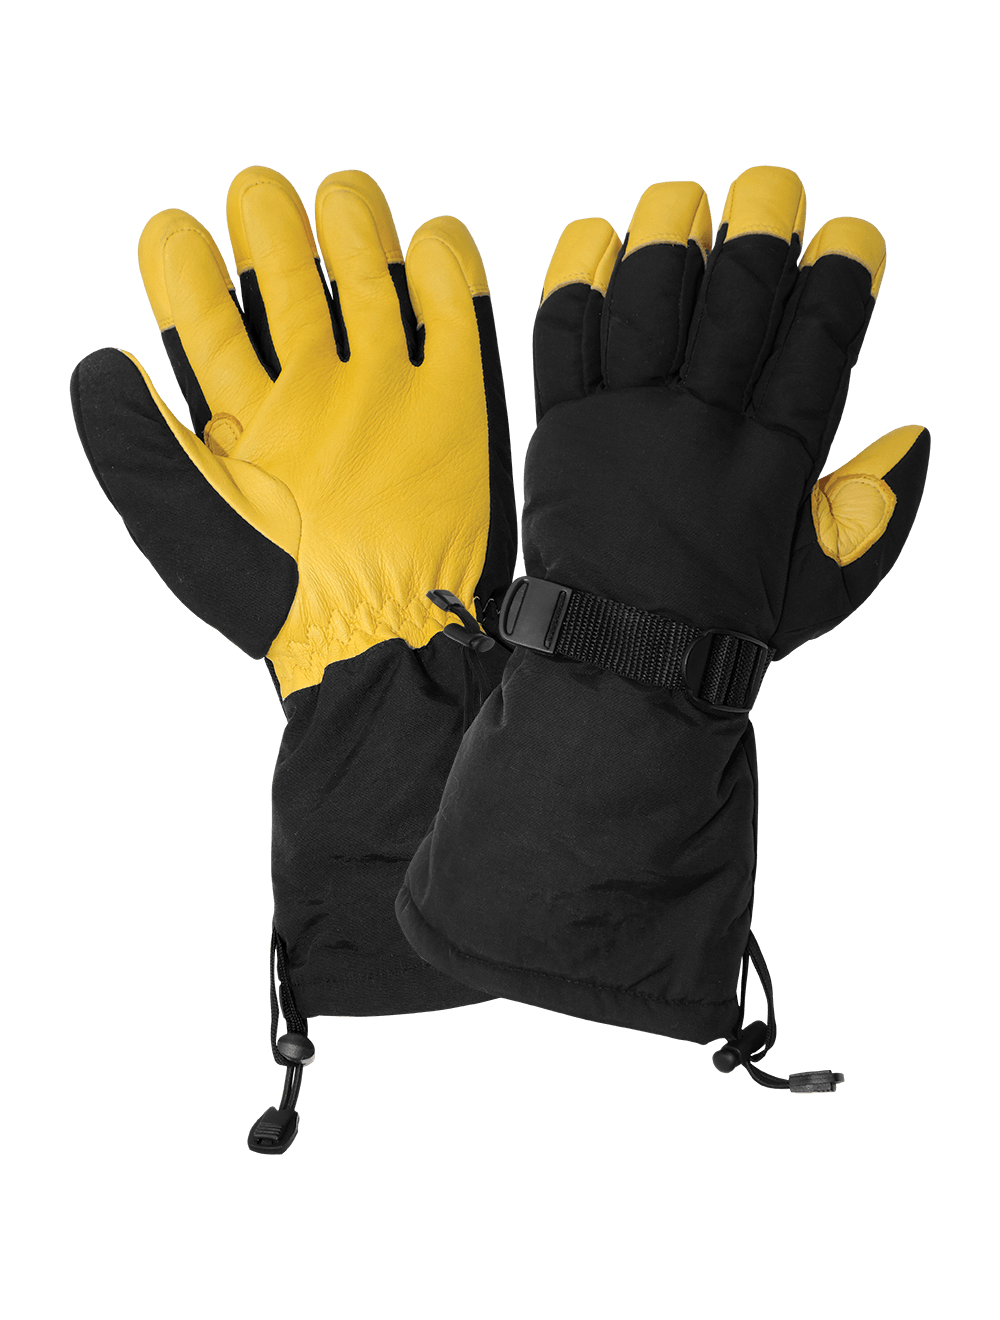 Global Glove and Safety Hand Protection, Eye Protection, Cooling  Protection, Heat Stress, Cut Resistant Protection Premium-Grade Grain  Deerskin Leather Palm, Low Temperature, Waterproof Gloves Insulated with  3M™ Thinsulate™ - SG7300INT